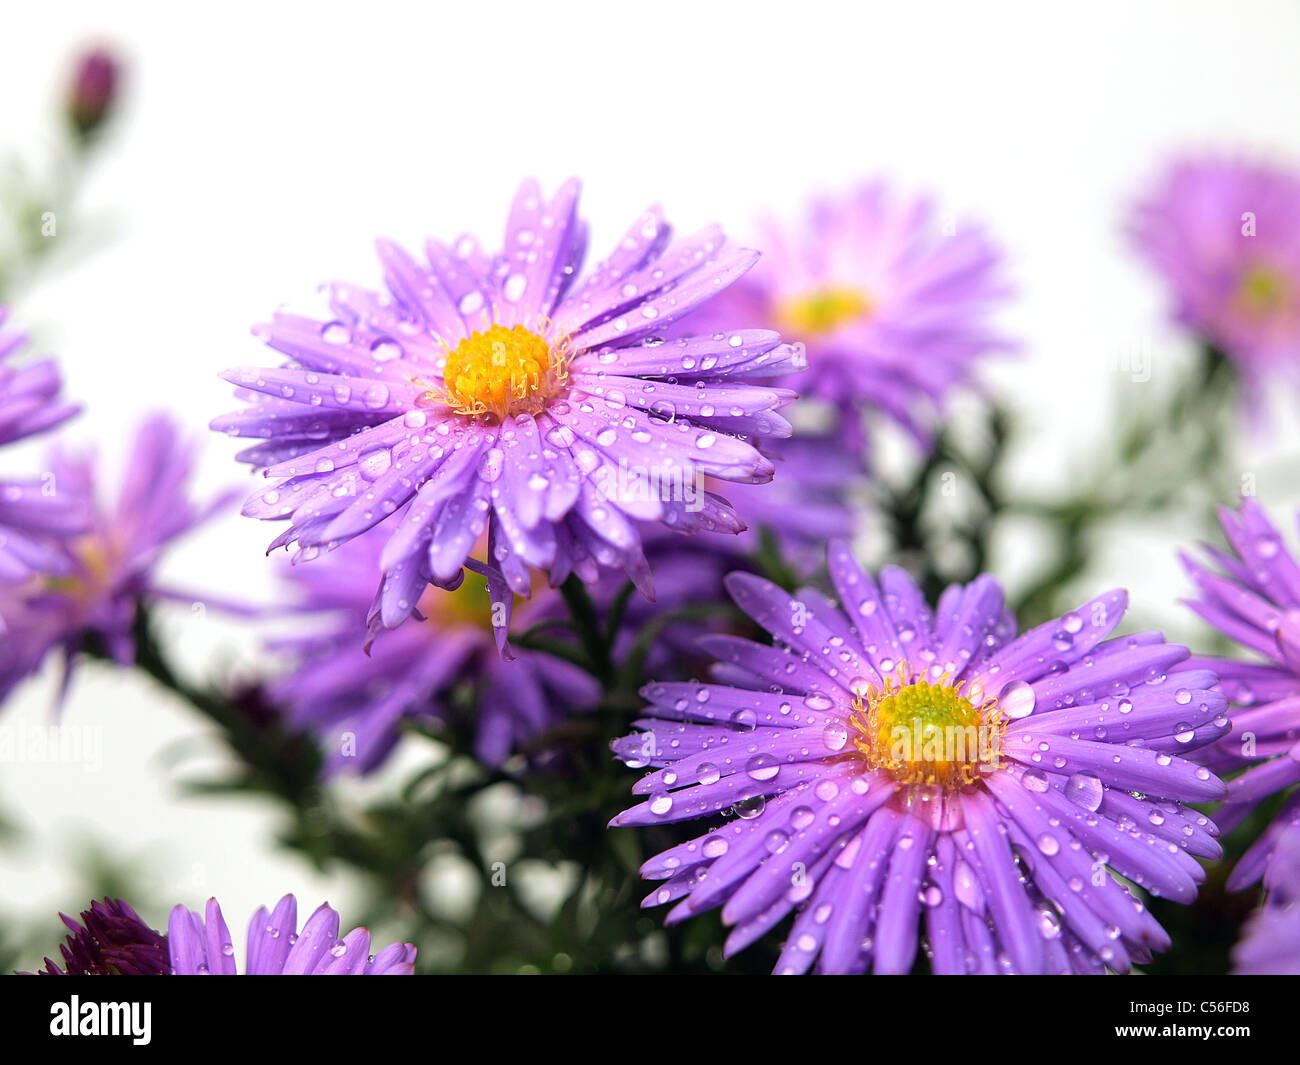 Aster flowers on the white background Stock Photo